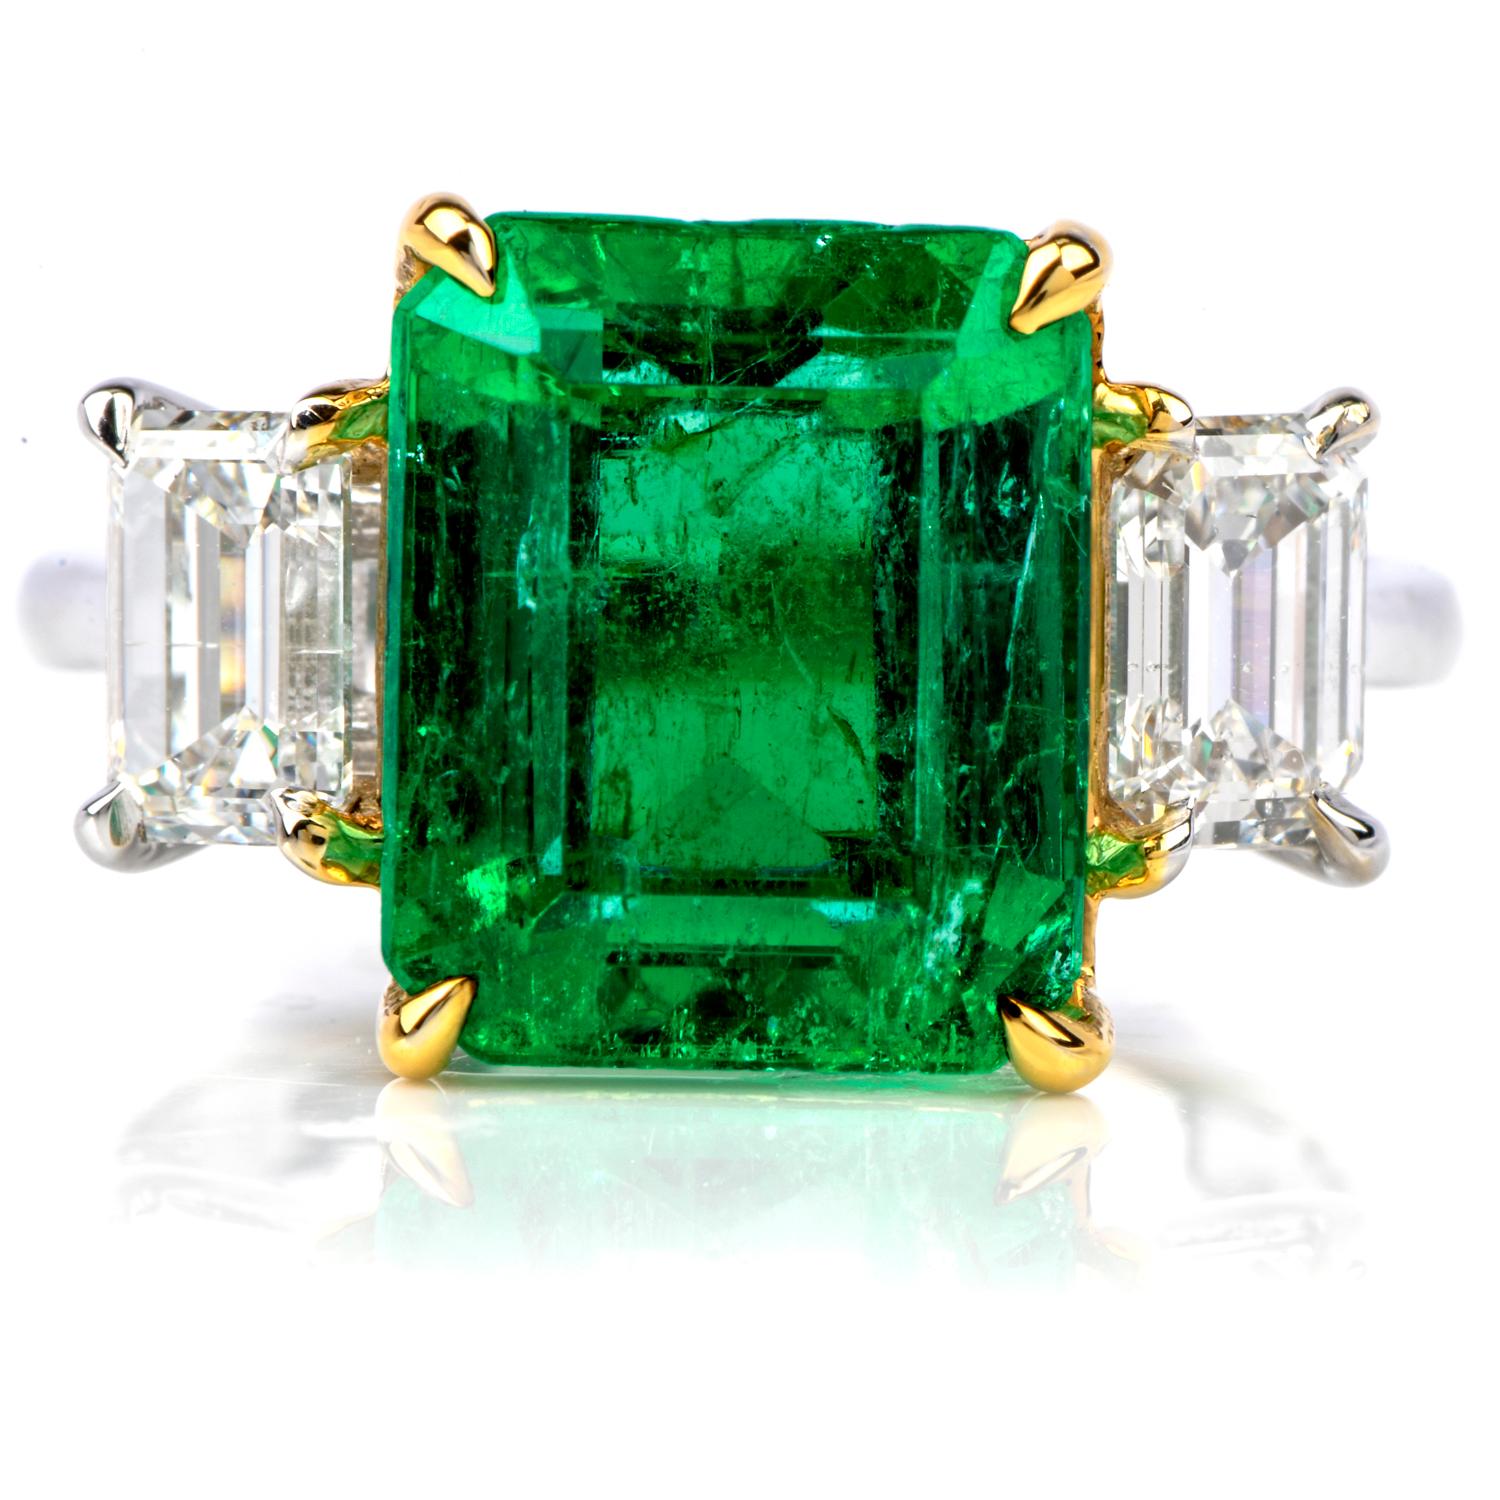 This classic three stone ring is crafted in solid 18k white gold.

It exposes at the center a genuine Colombian Emerald,

weighing 4.65 carats measuring approx.: 10.90mm x 9.0mm x 6.85mm;
and flanked by a pair of genuine baguette diamonds